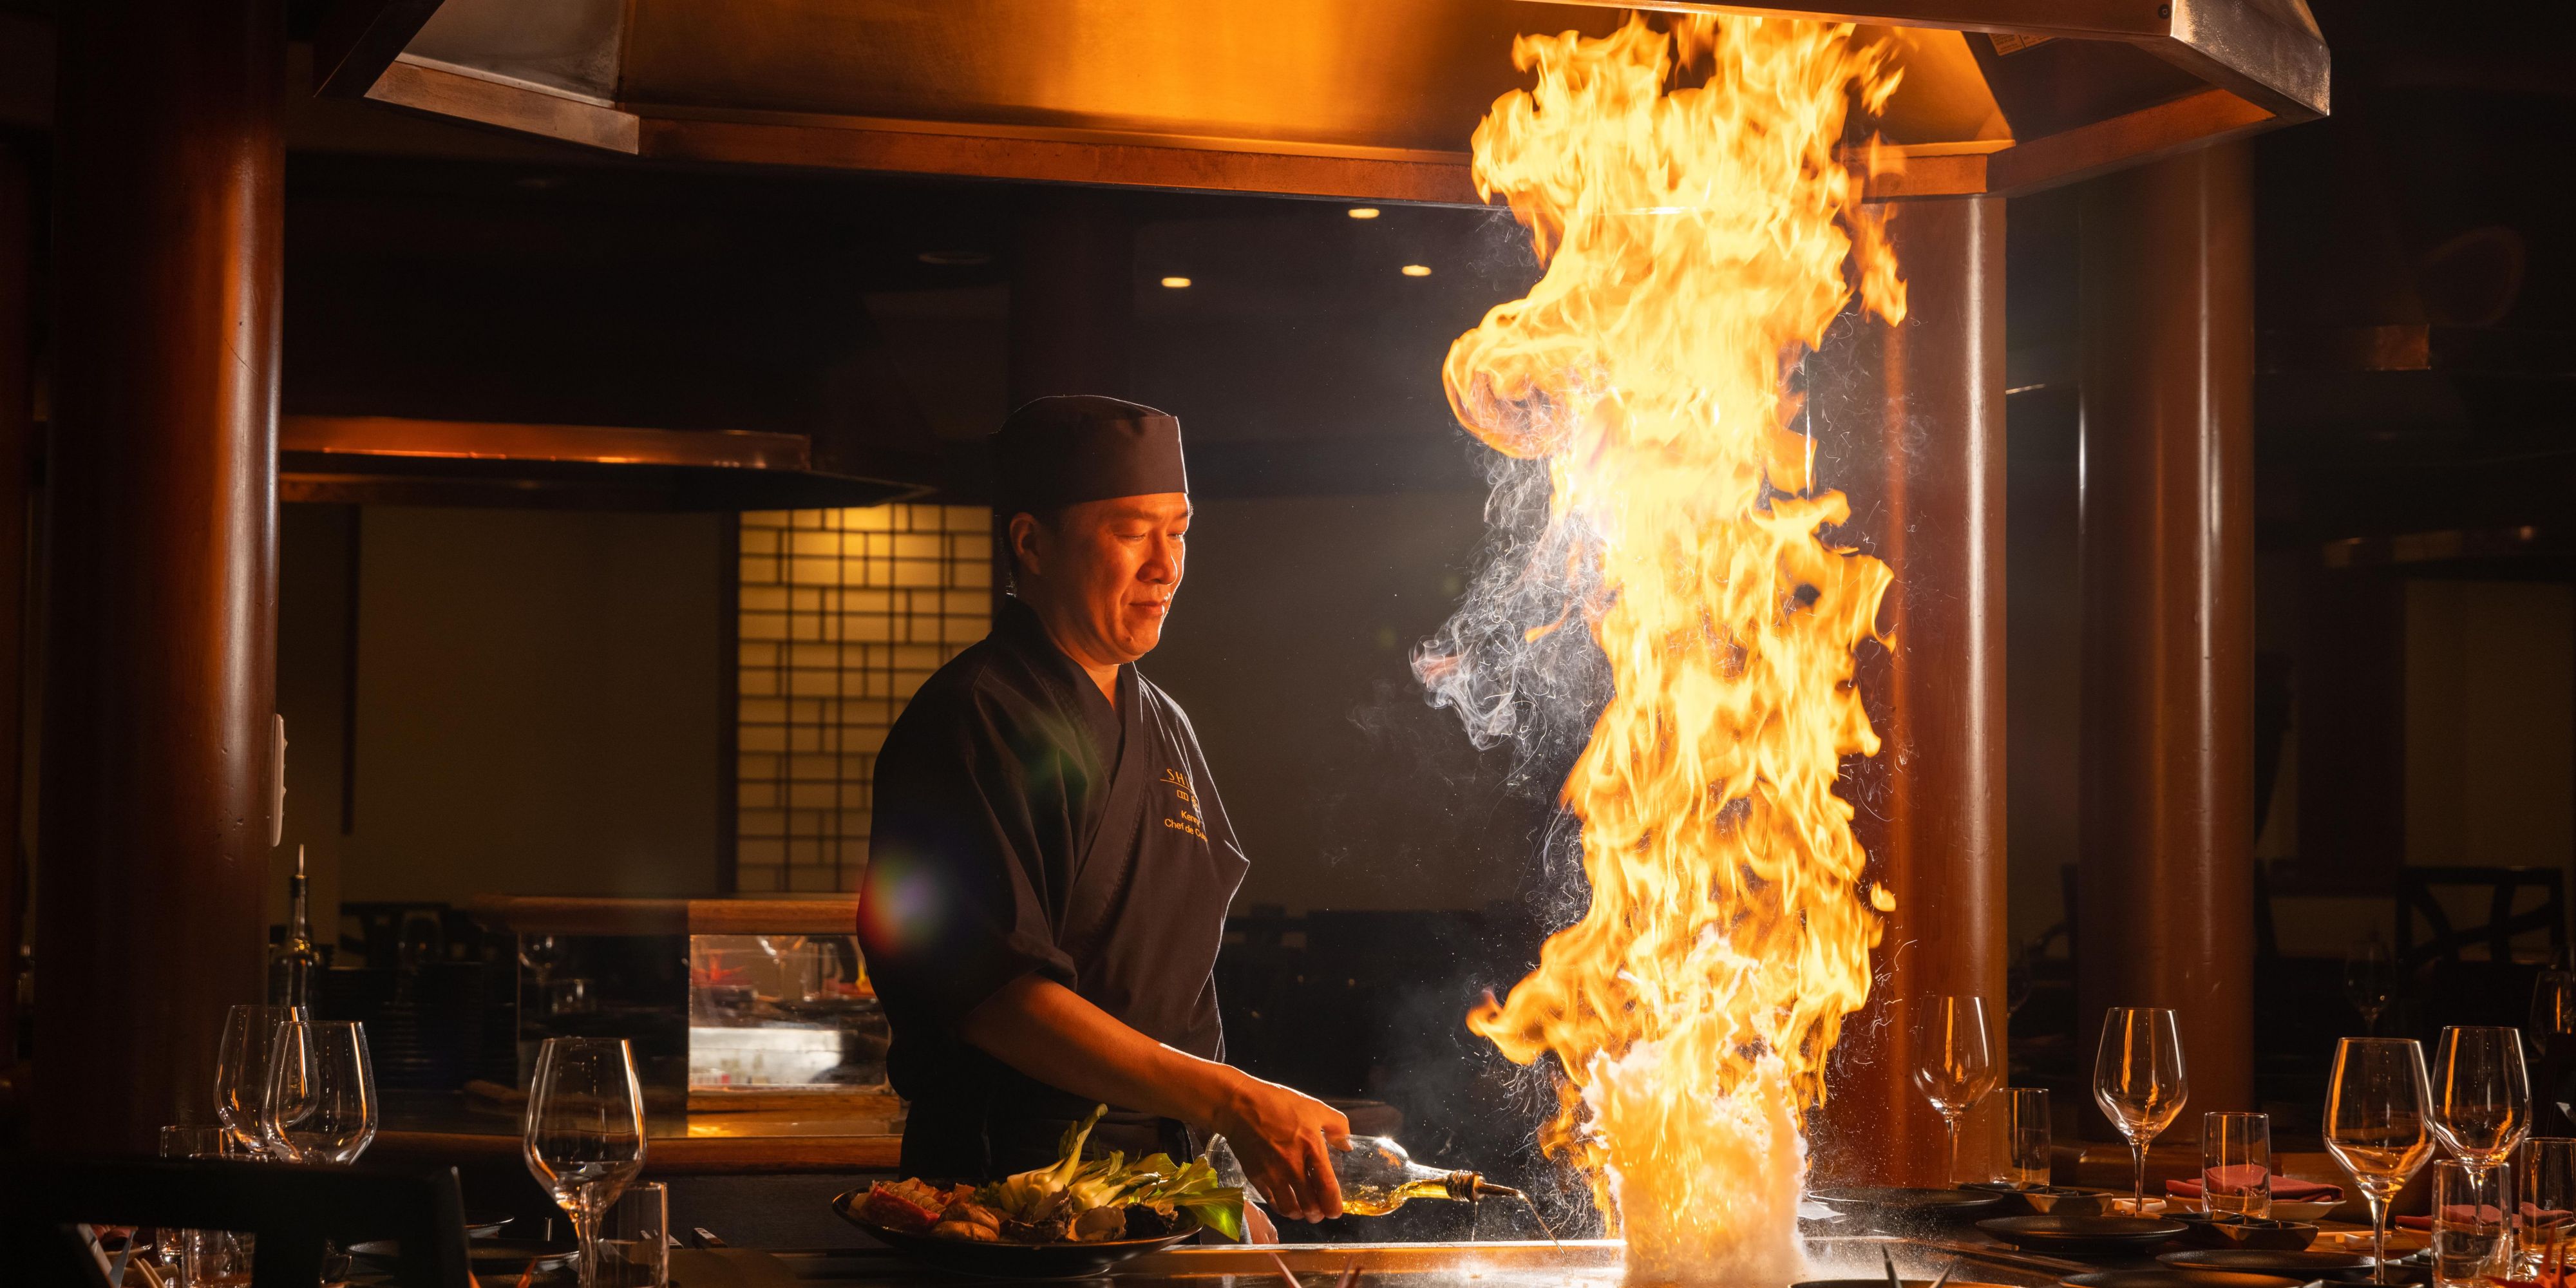 Experience award-winning authentic Japanese cuisine in the heart of Adelaide. Shiki offers world-class service and unique experience for all guests, combining seasonal produce with amazing Japanese sushi and sashimi, tempura and teppanyaki.